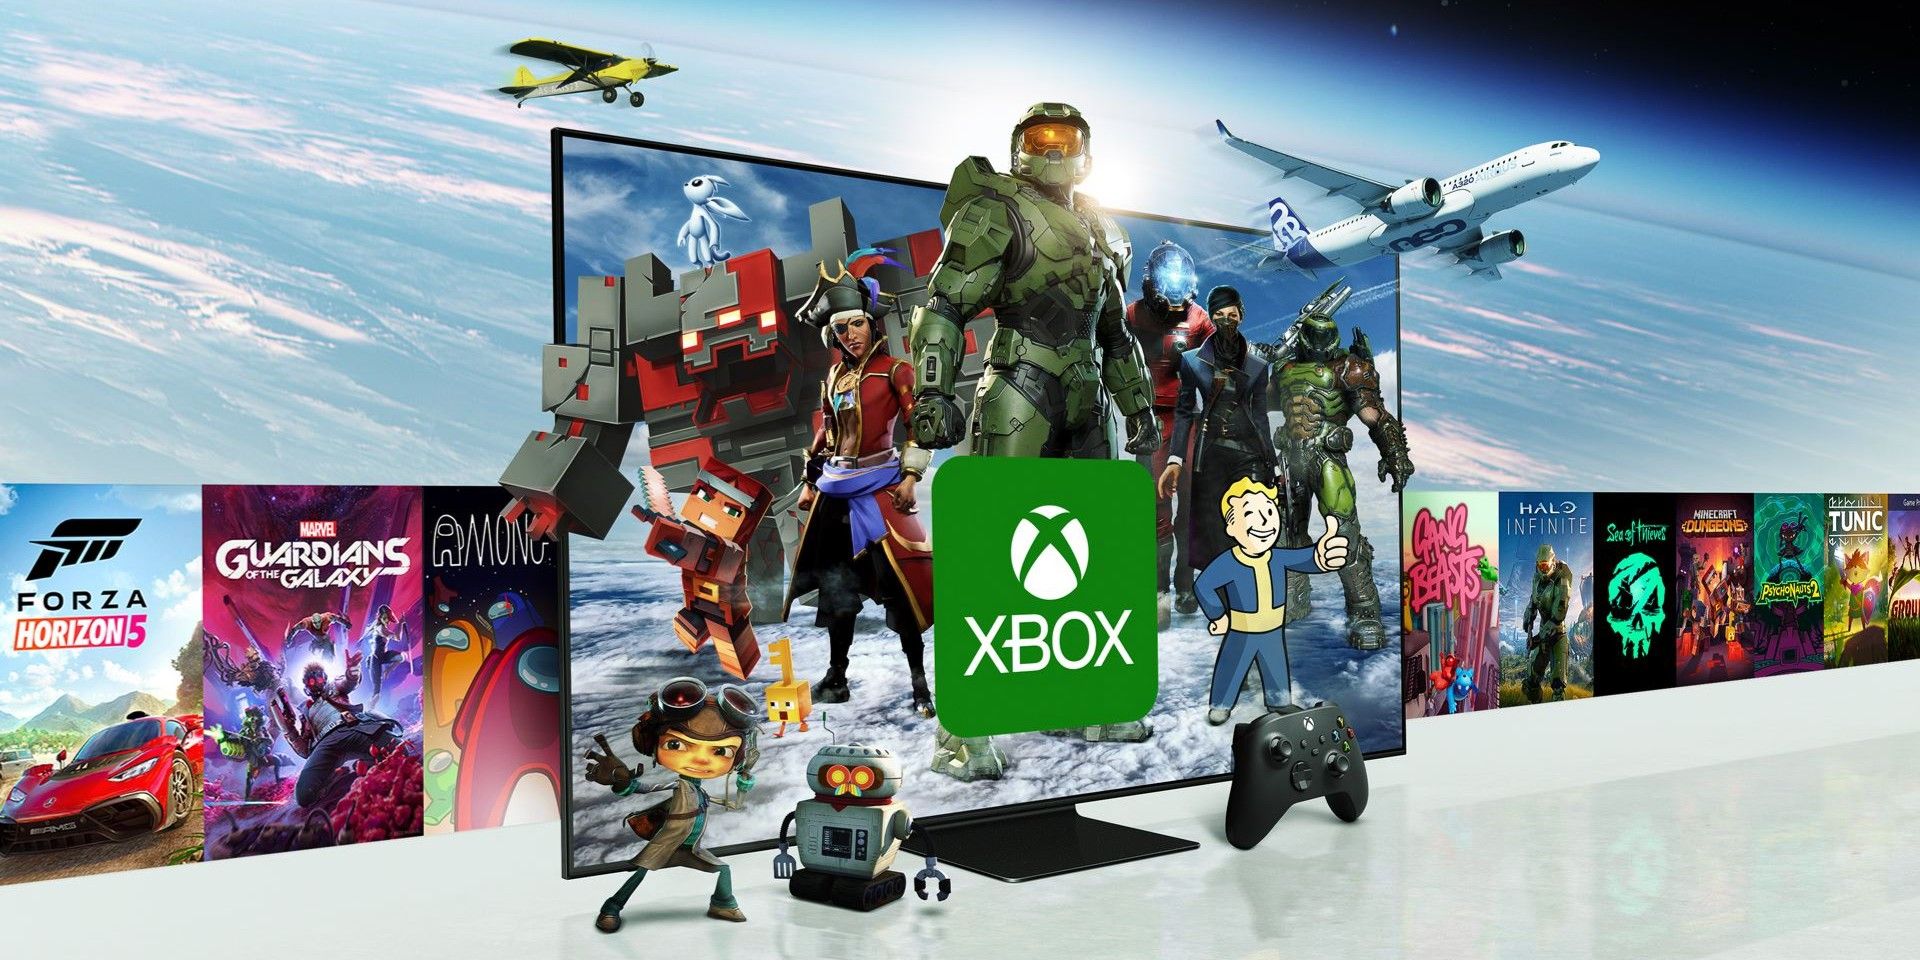 Promotional image for Samsung's collaboration with Microsoft, featuring protagonists from prominent Xbox titles.